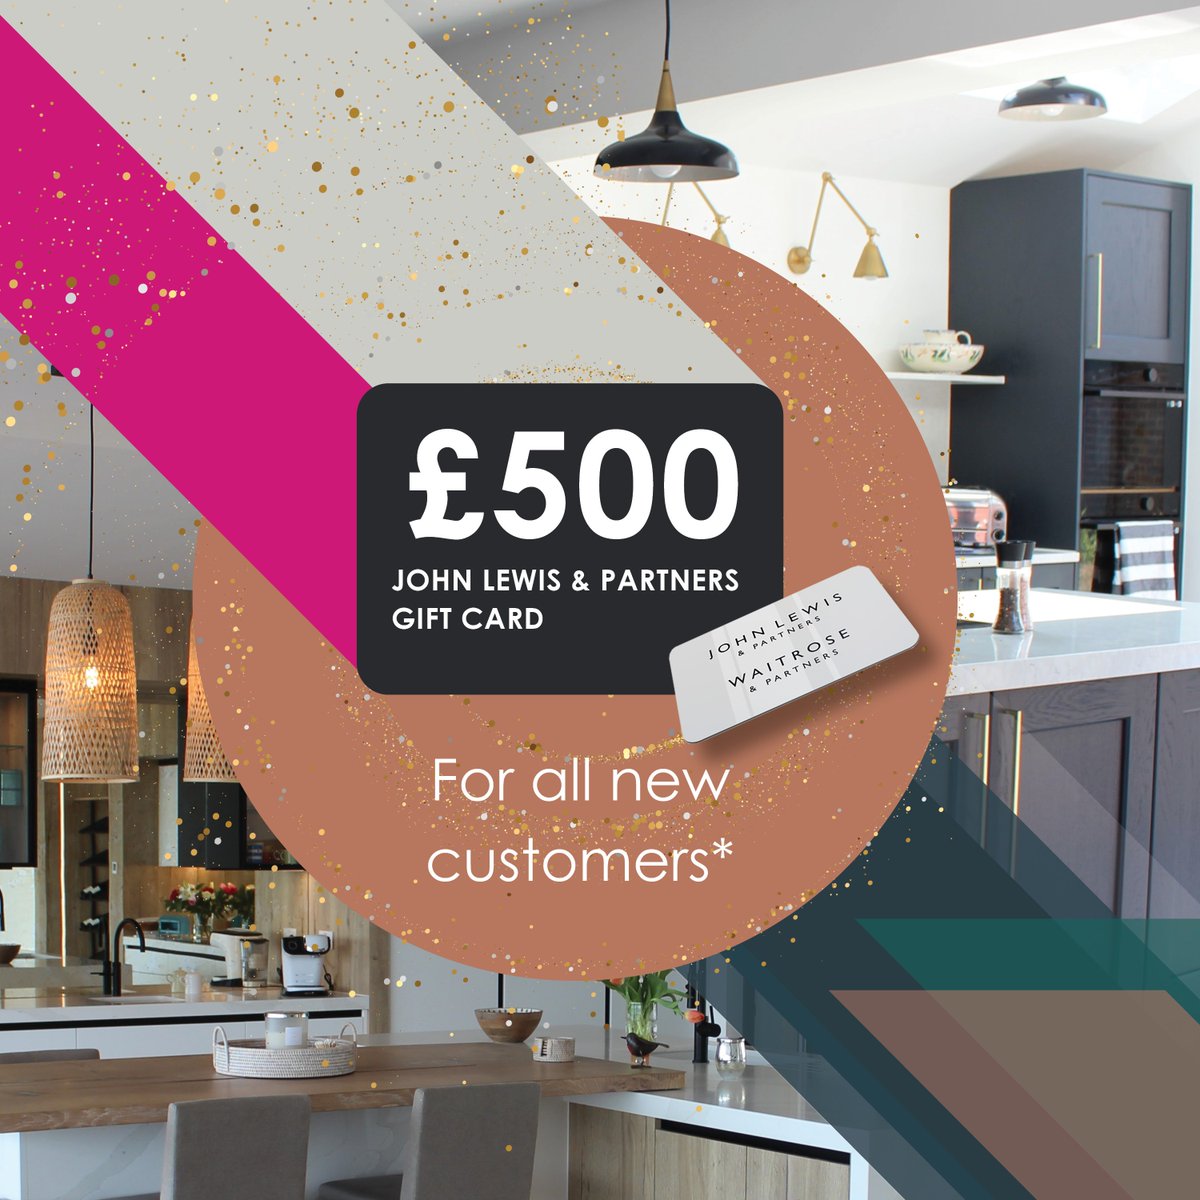 With our exclusive winter promotion you will receive a £500 John Lewis & Partners voucher on receipt of your new kitchen. A little gift to help furnish your kitchen or stock your fridge with delicious Waitrose goodies! Book an appointment to get started! kitchenliving.co.uk/kitchen-design…